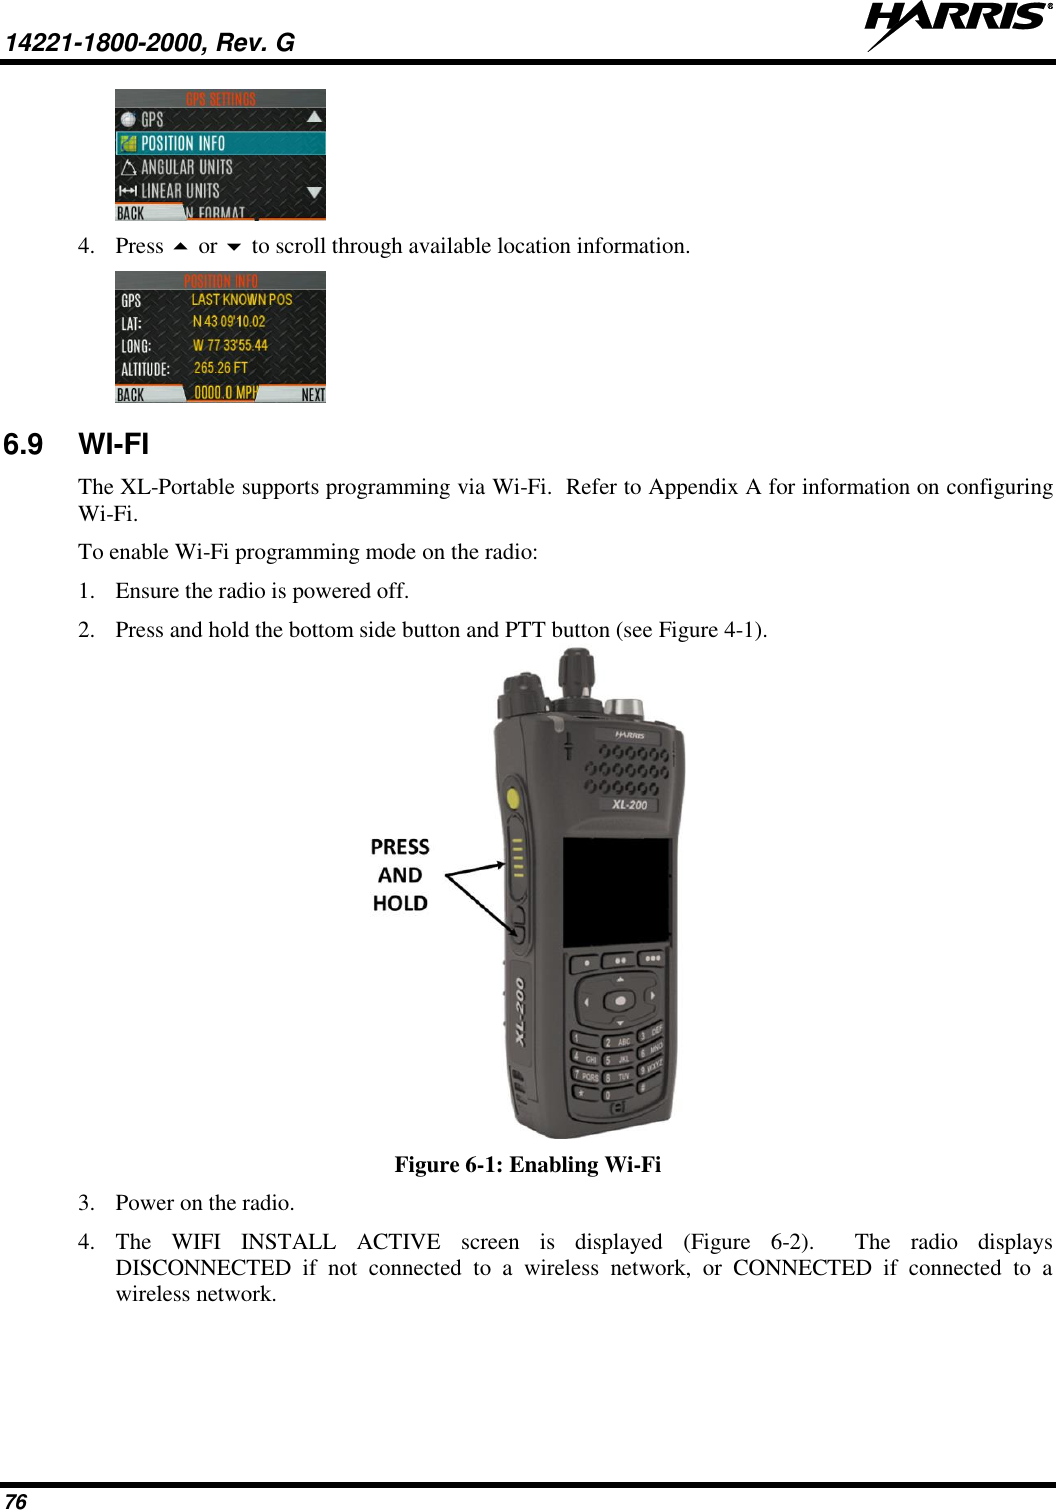 14221-1800-2000, Rev. G   76  4. Press  or  to scroll through available location information.  6.9  WI-FI  The XL-Portable supports programming via Wi-Fi.  Refer to Appendix A for information on configuring Wi-Fi. To enable Wi-Fi programming mode on the radio: 1. Ensure the radio is powered off. 2. Press and hold the bottom side button and PTT button (see Figure 4-1).  Figure 6-1: Enabling Wi-Fi 3. Power on the radio. 4. The  WIFI  INSTALL  ACTIVE  screen  is  displayed  (Figure  6-2).  The  radio  displays DISCONNECTED  if  not  connected  to  a  wireless  network,  or  CONNECTED  if  connected  to  a wireless network. 